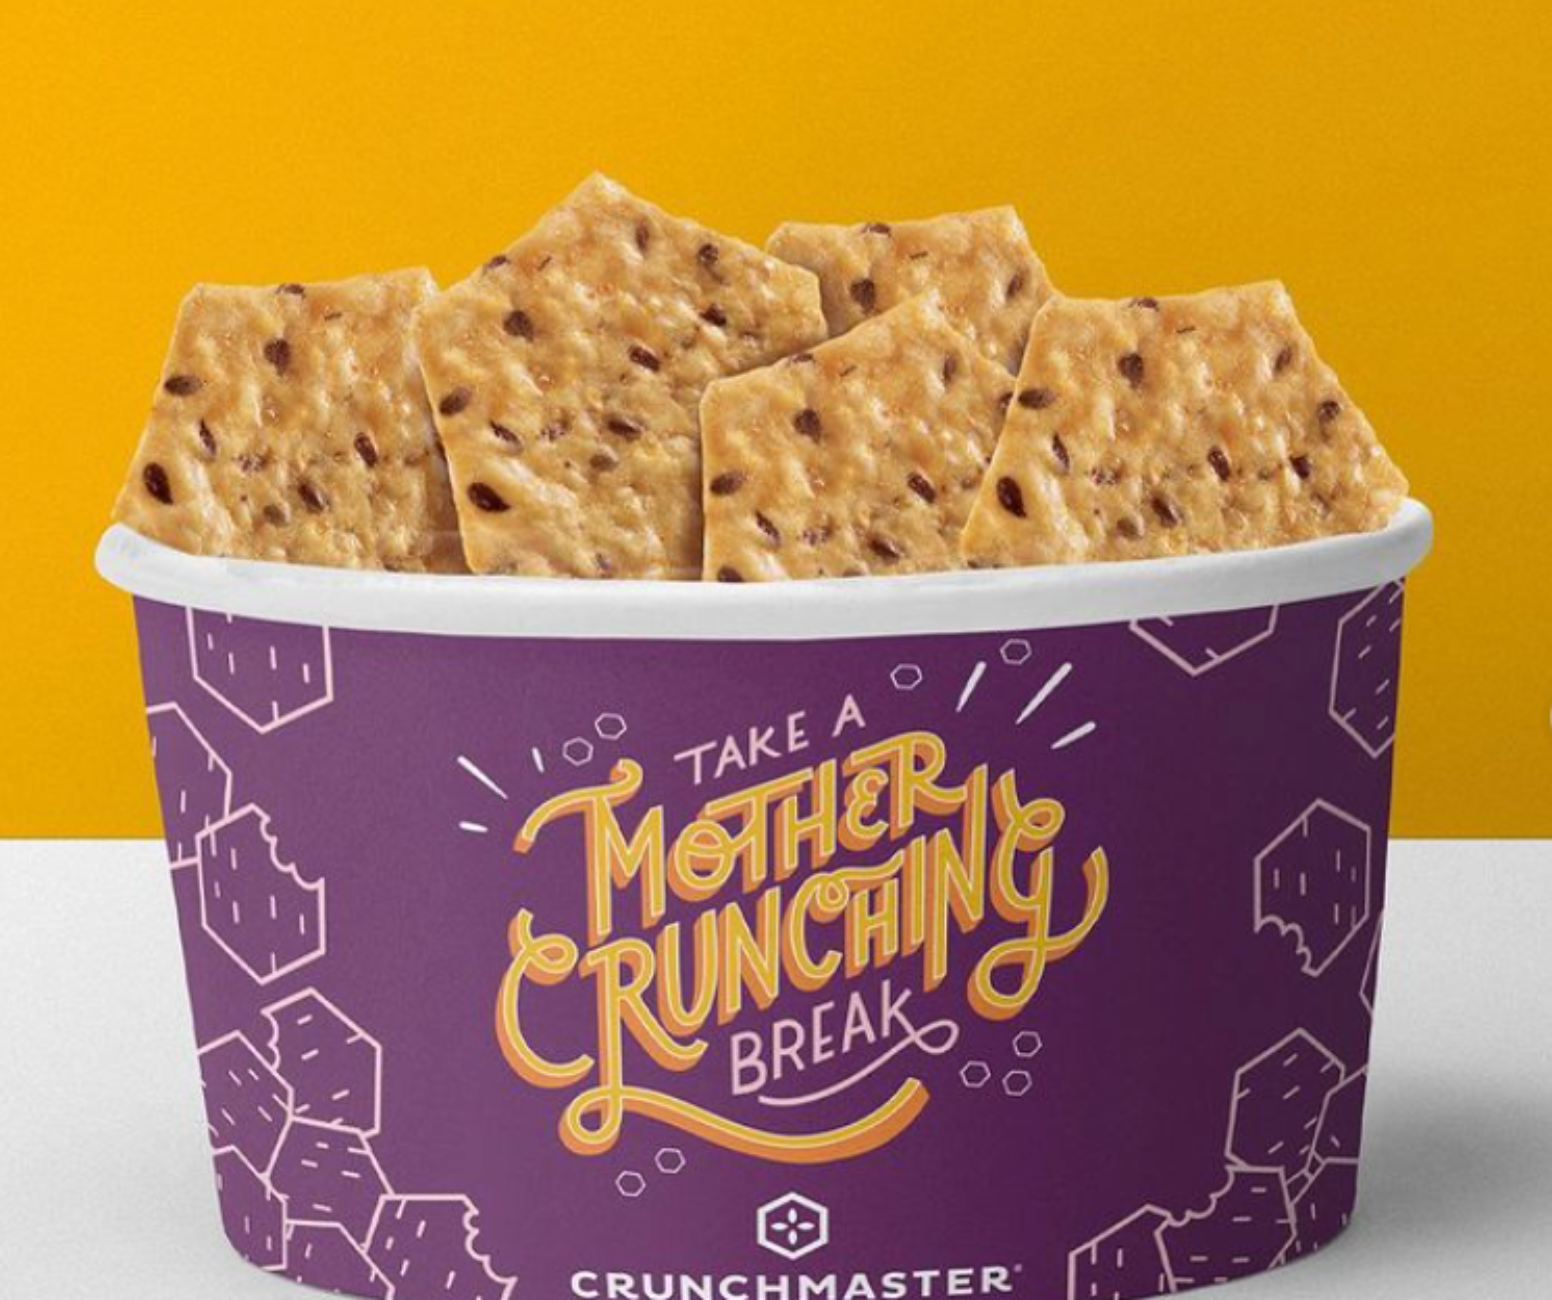 Crunchmaster (TH Foods)